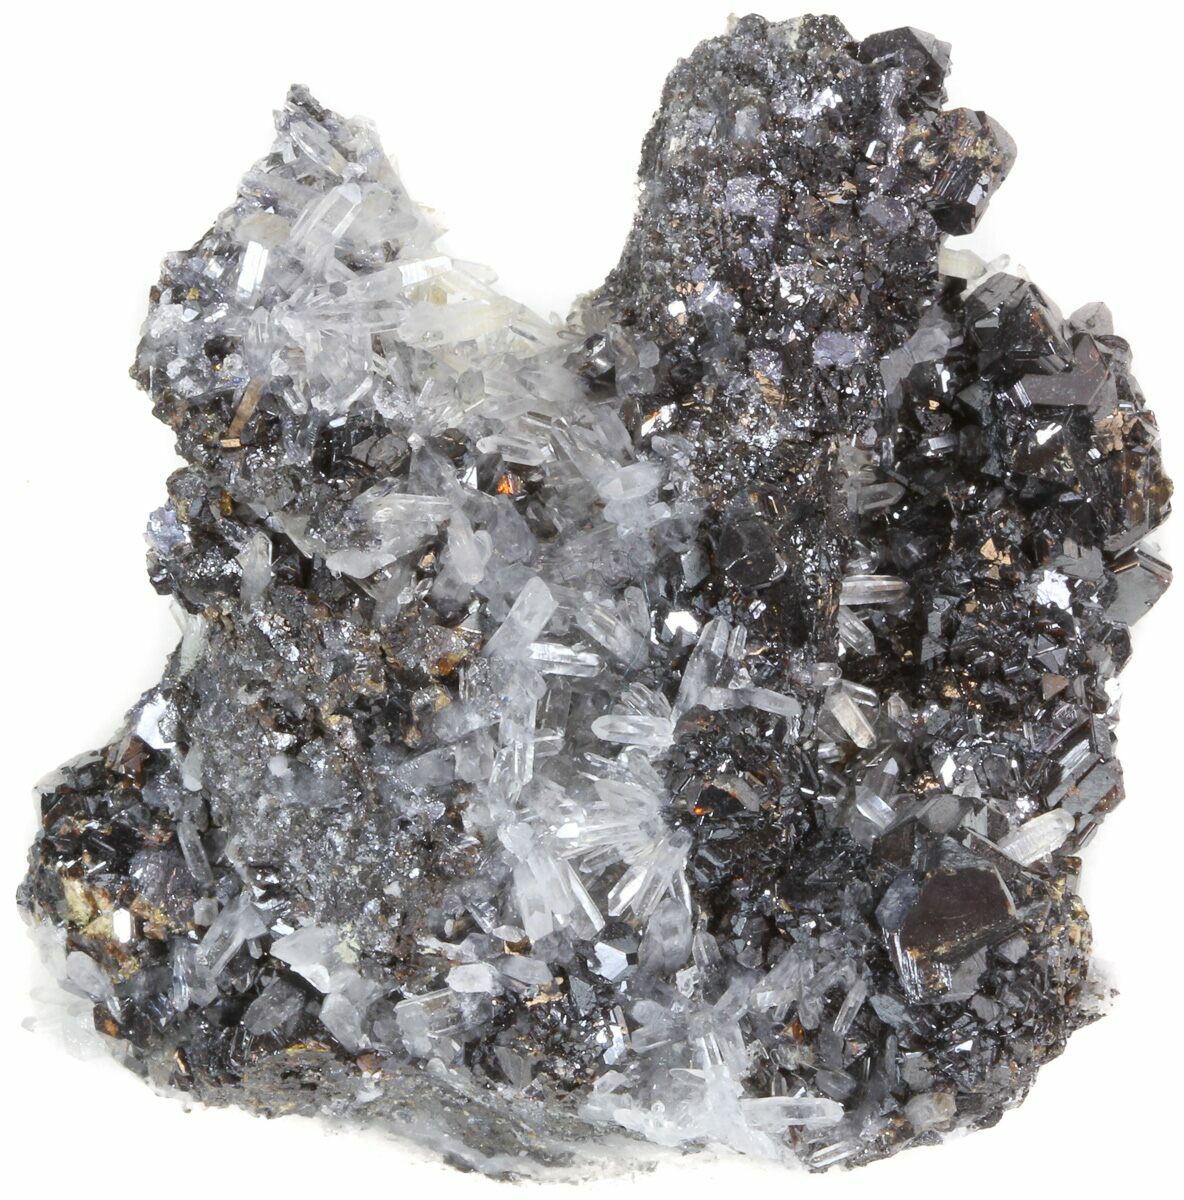 2.3 Lustrous Hematite Crystal Cluster - South Africa